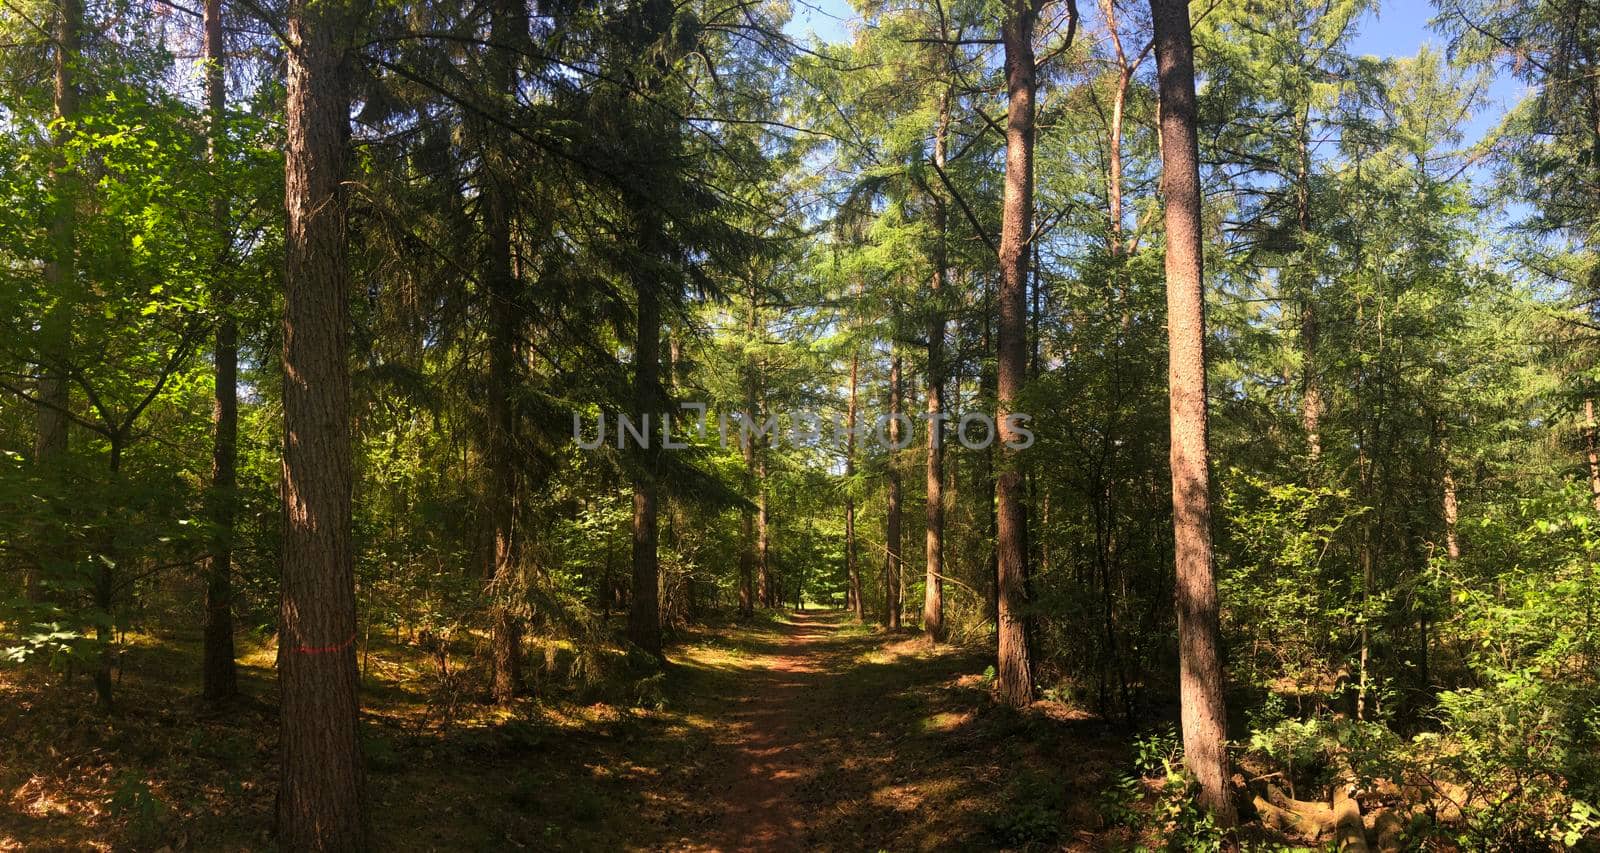 Path through the forest around Hardenberg in Overijssel, The Netherlands